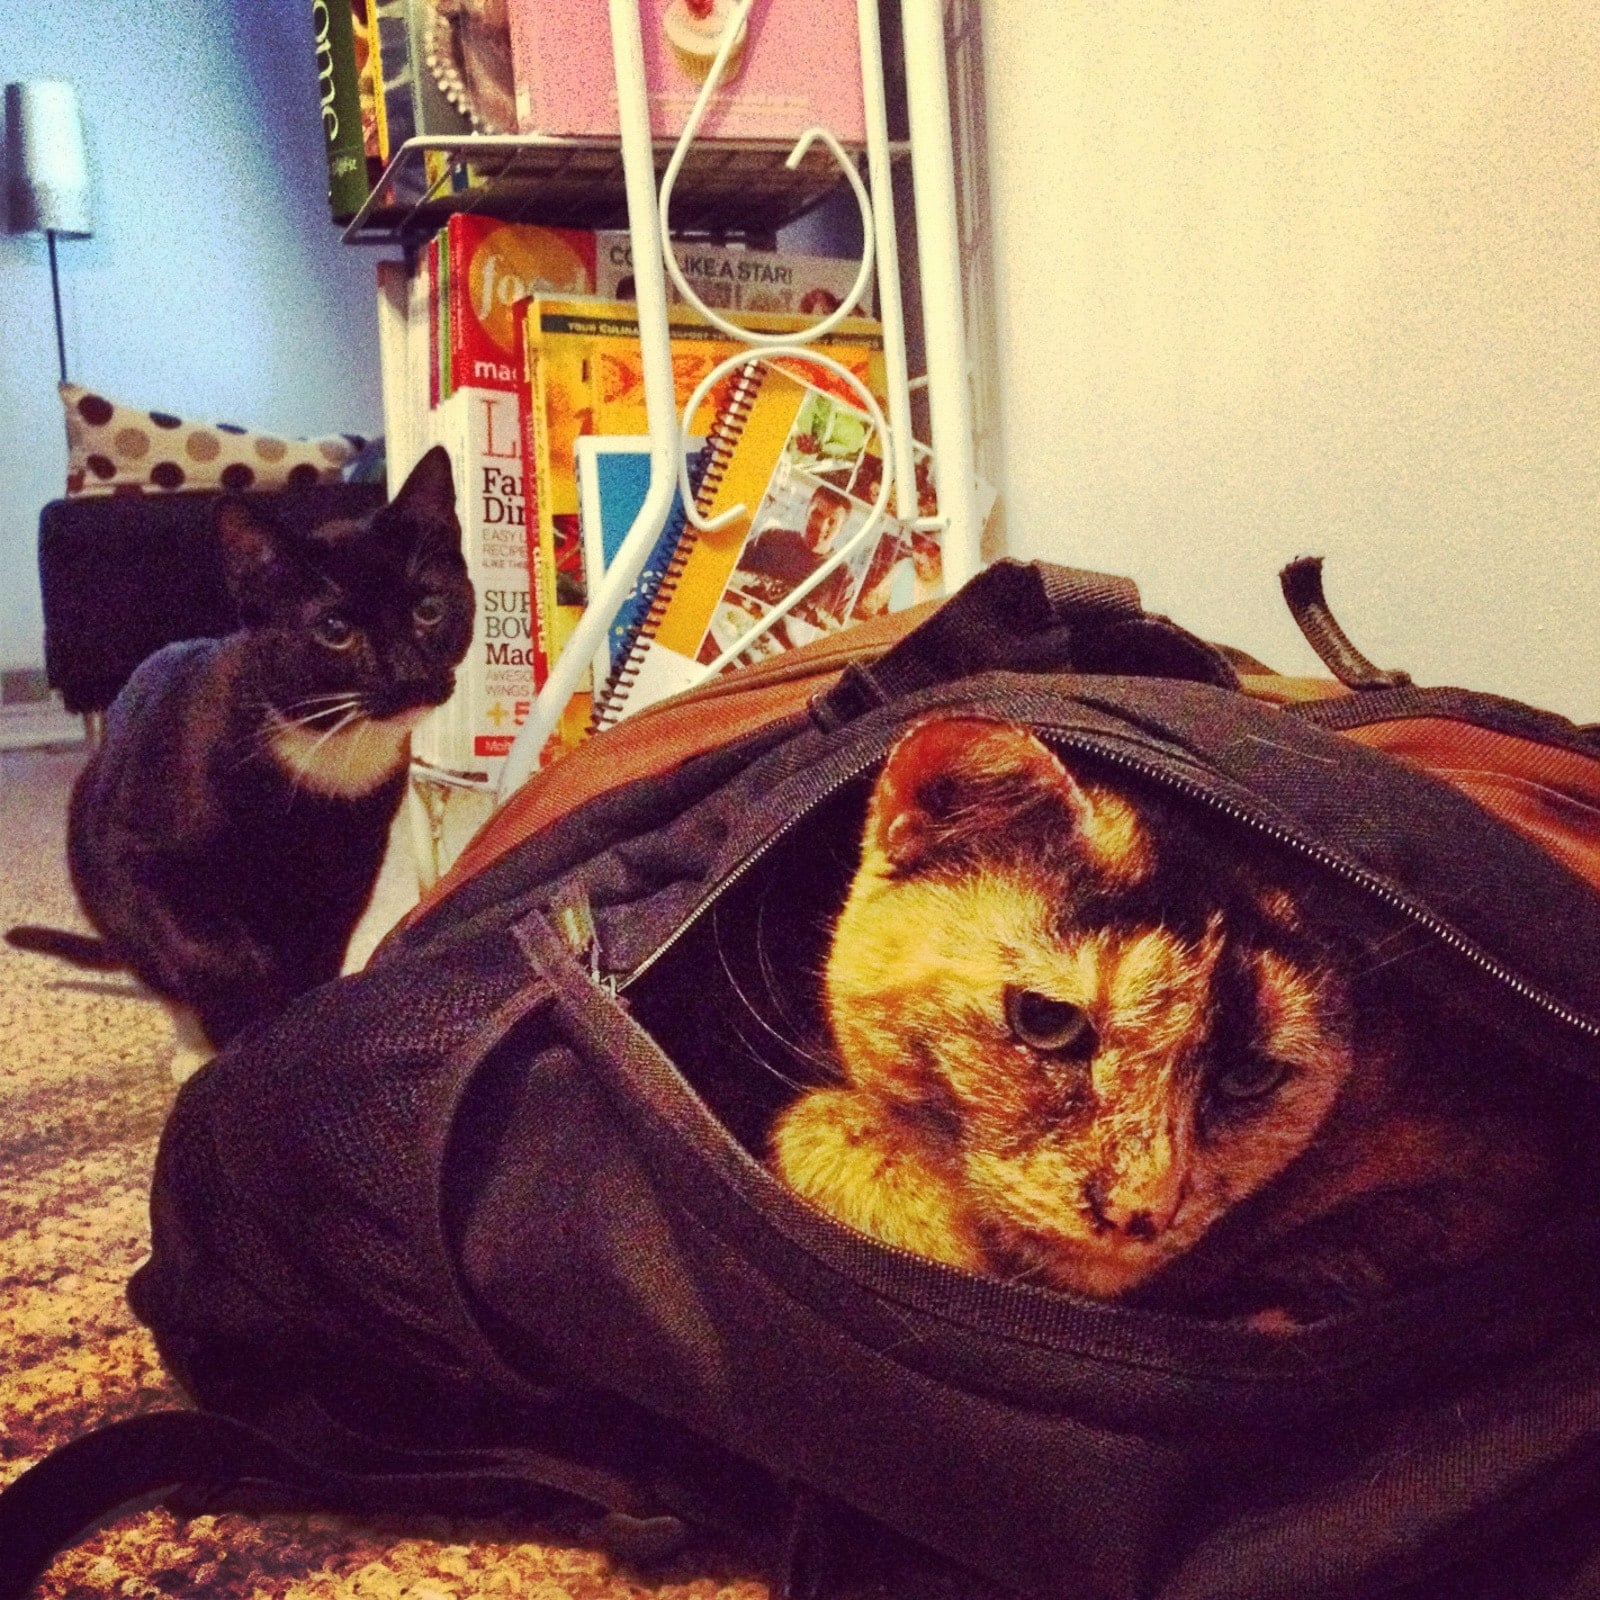 Leela in a bag with Fry watching